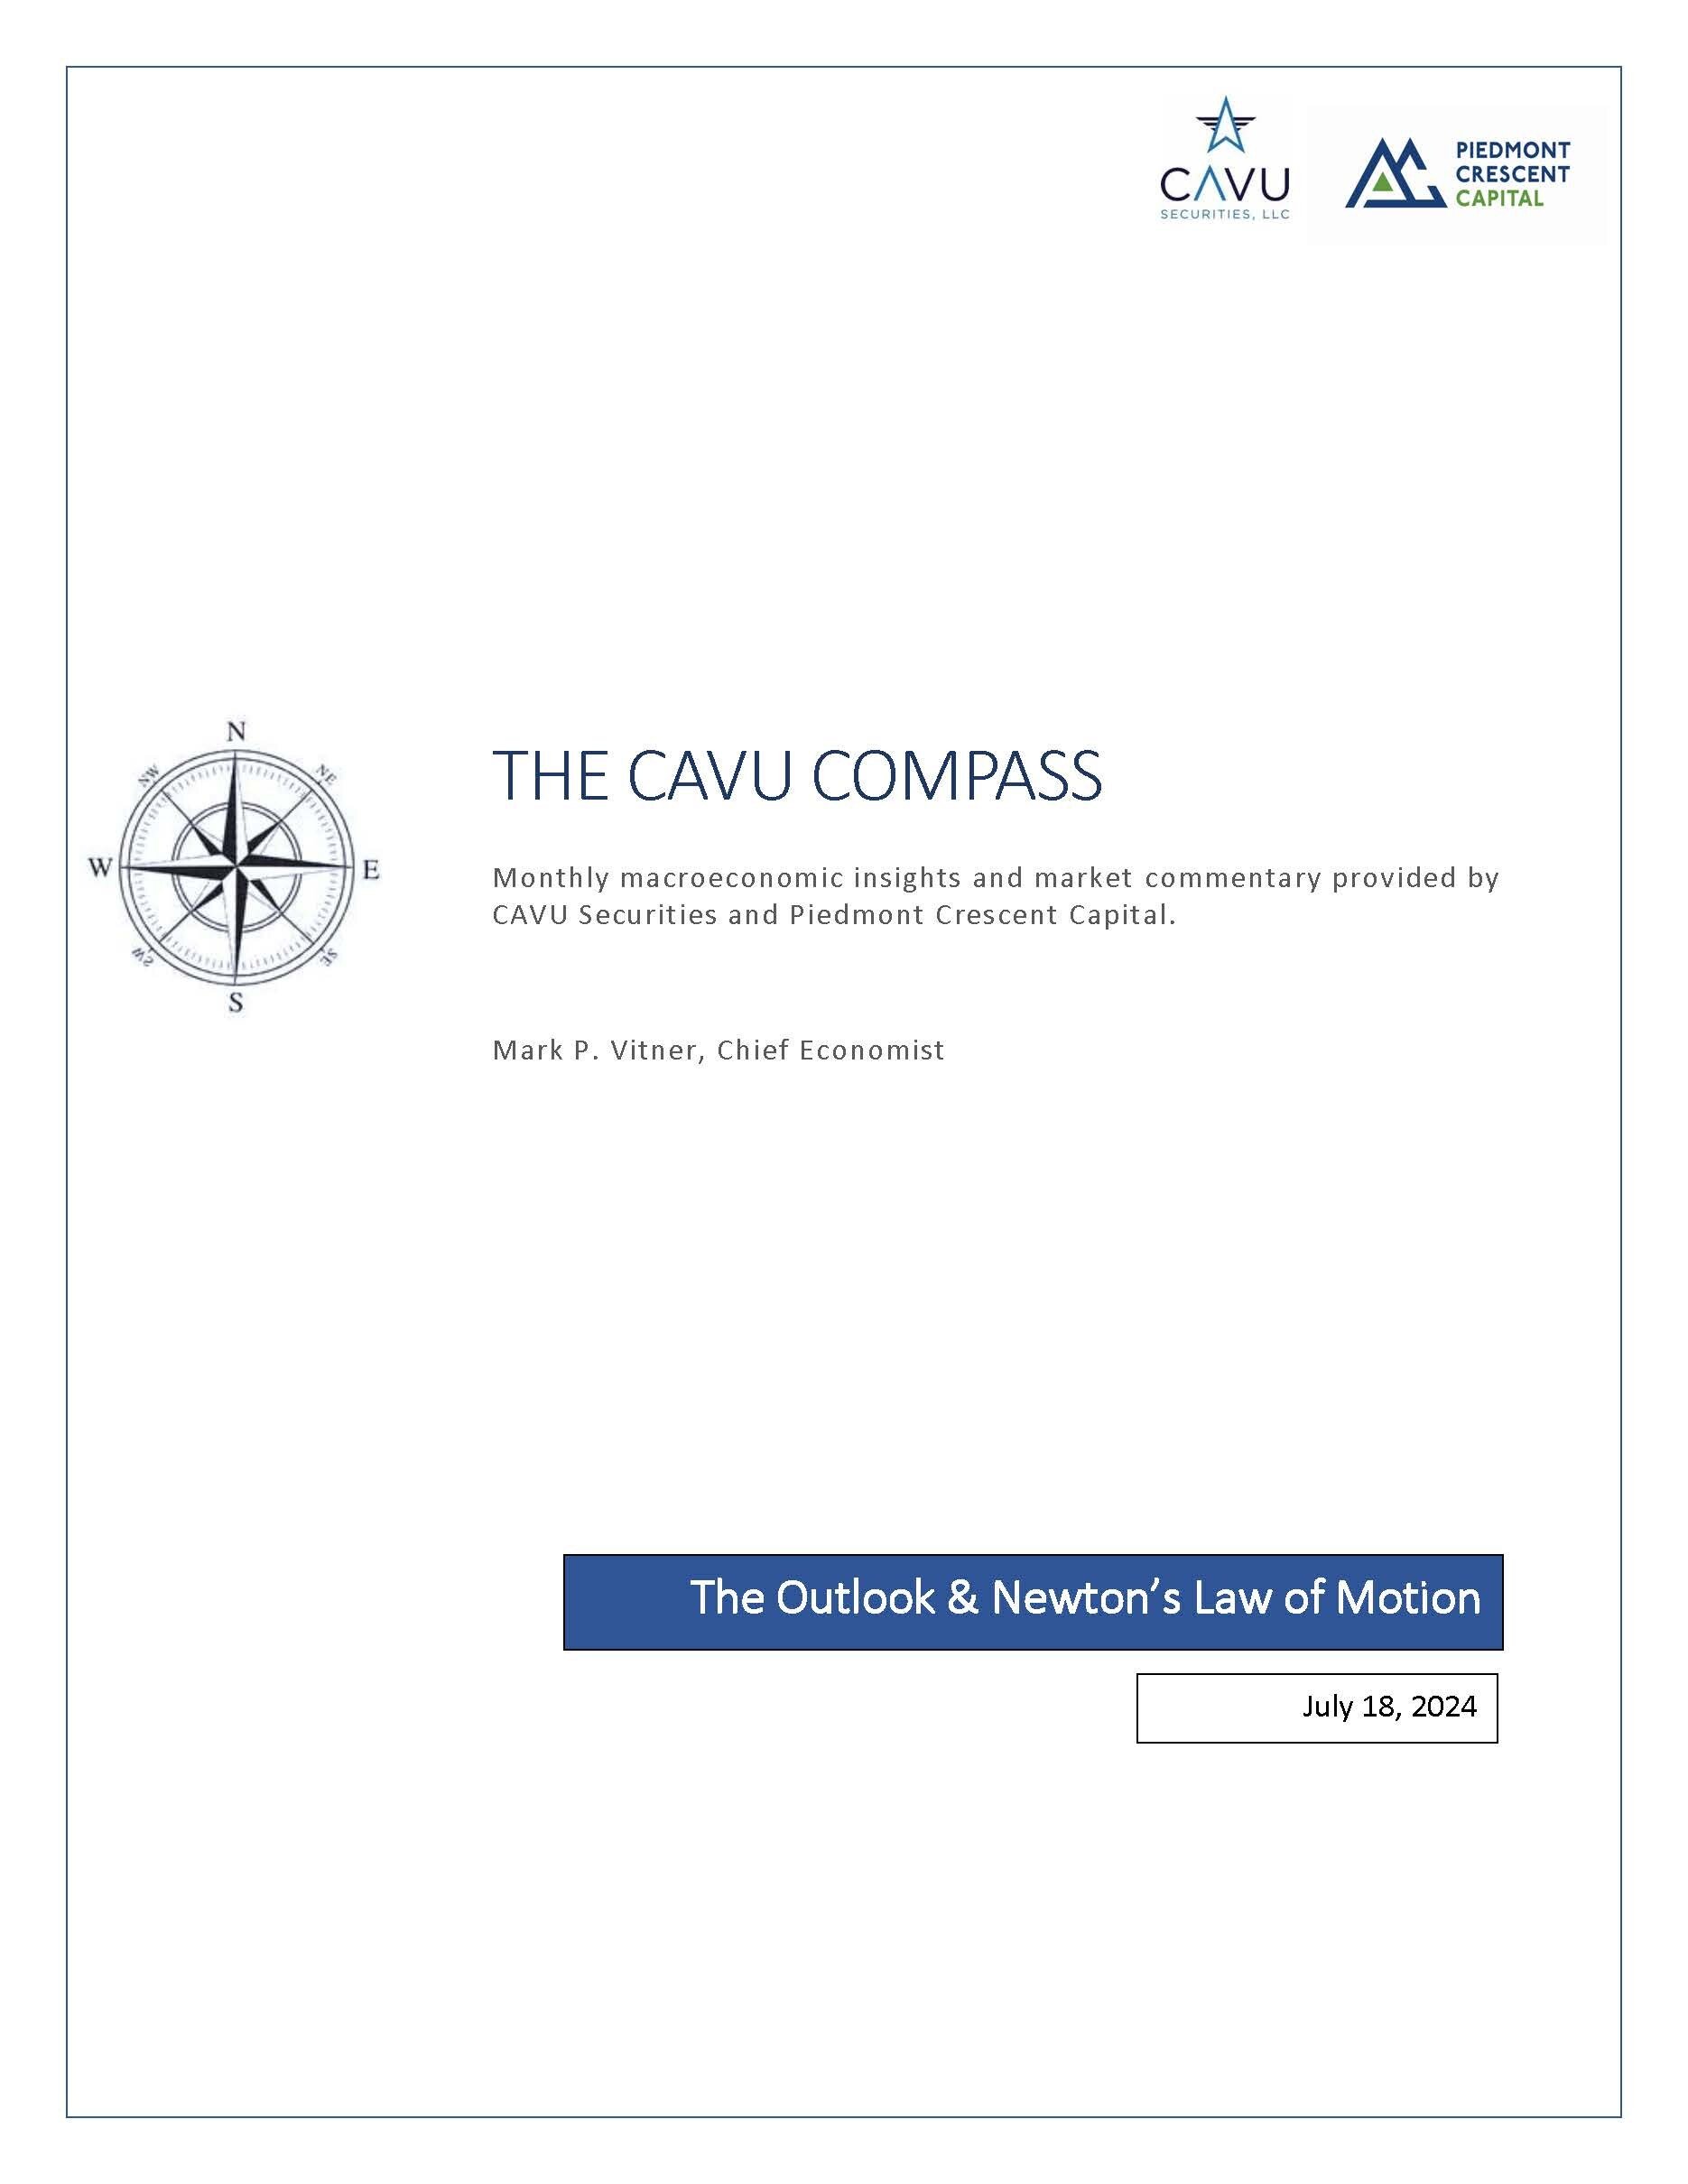 The CAVU Compass - The Outlook & Newton's Law of Motion